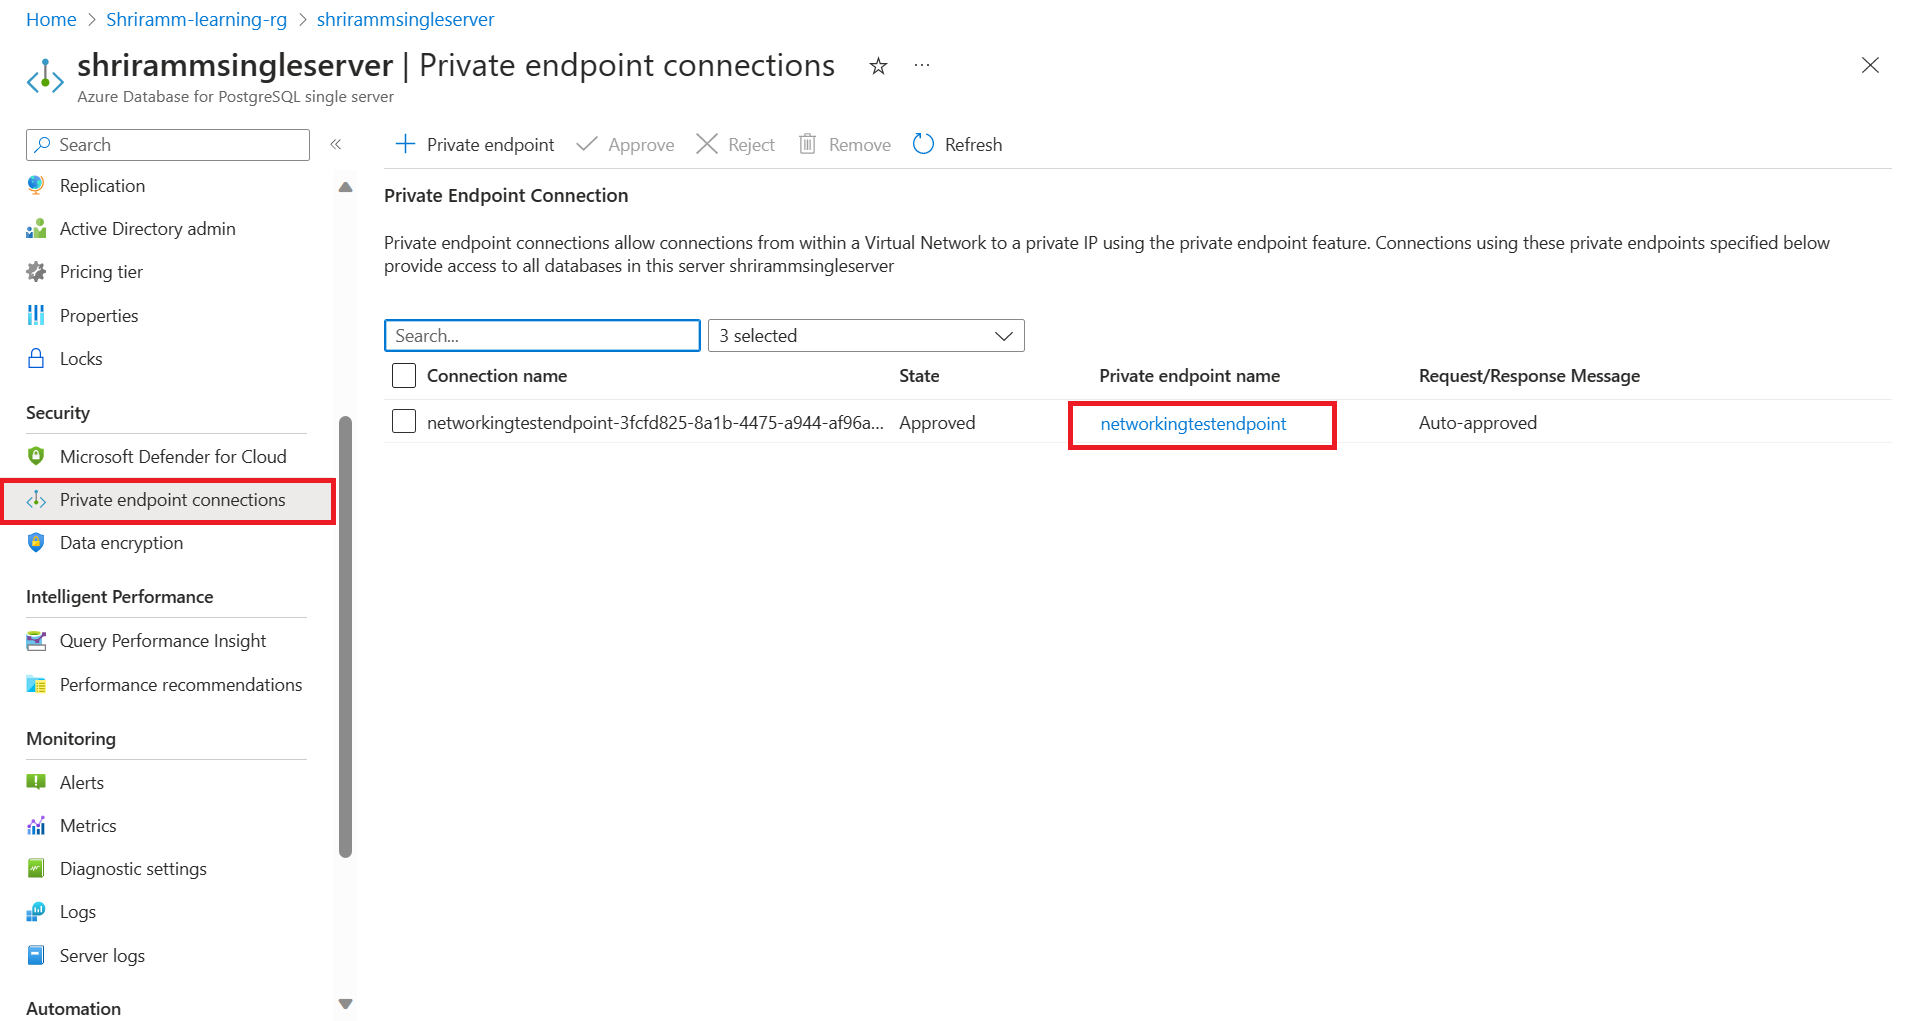 Screenshot of private endpoint connection in single server.